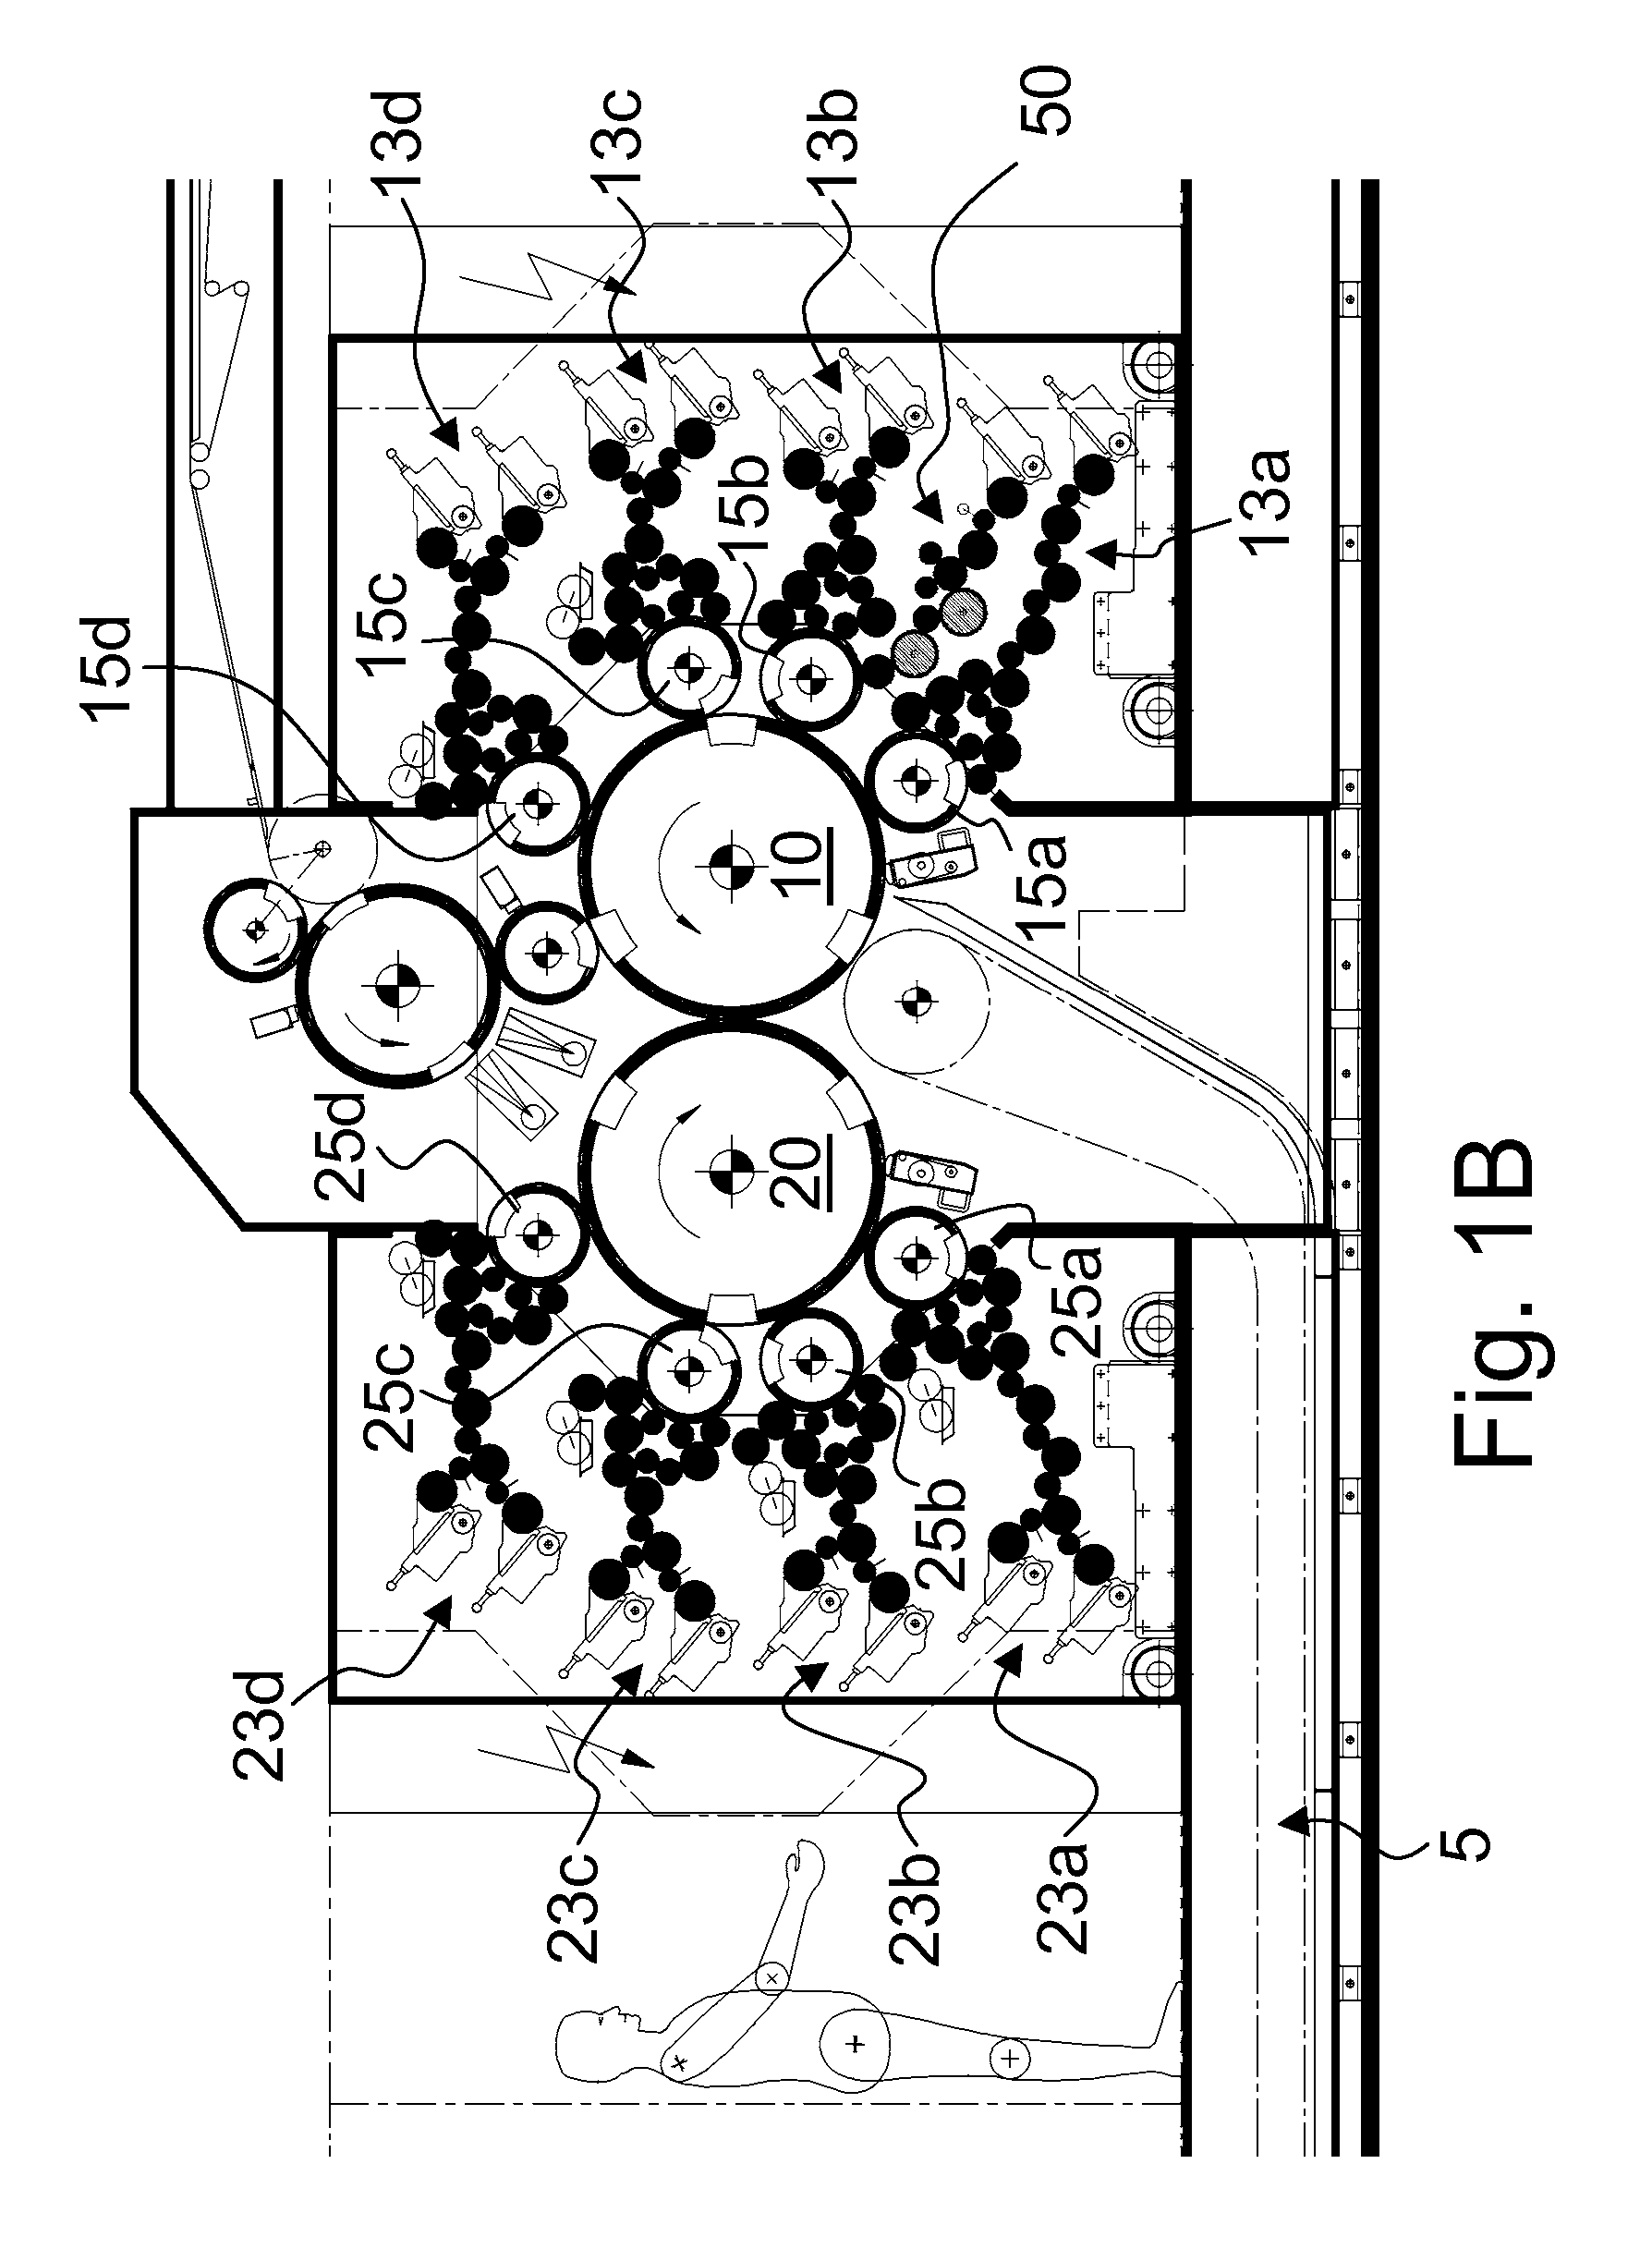 Method and Apparatus for Forming an Ink Pattern Exhibiting a Two-Dimensional Ink Gradient